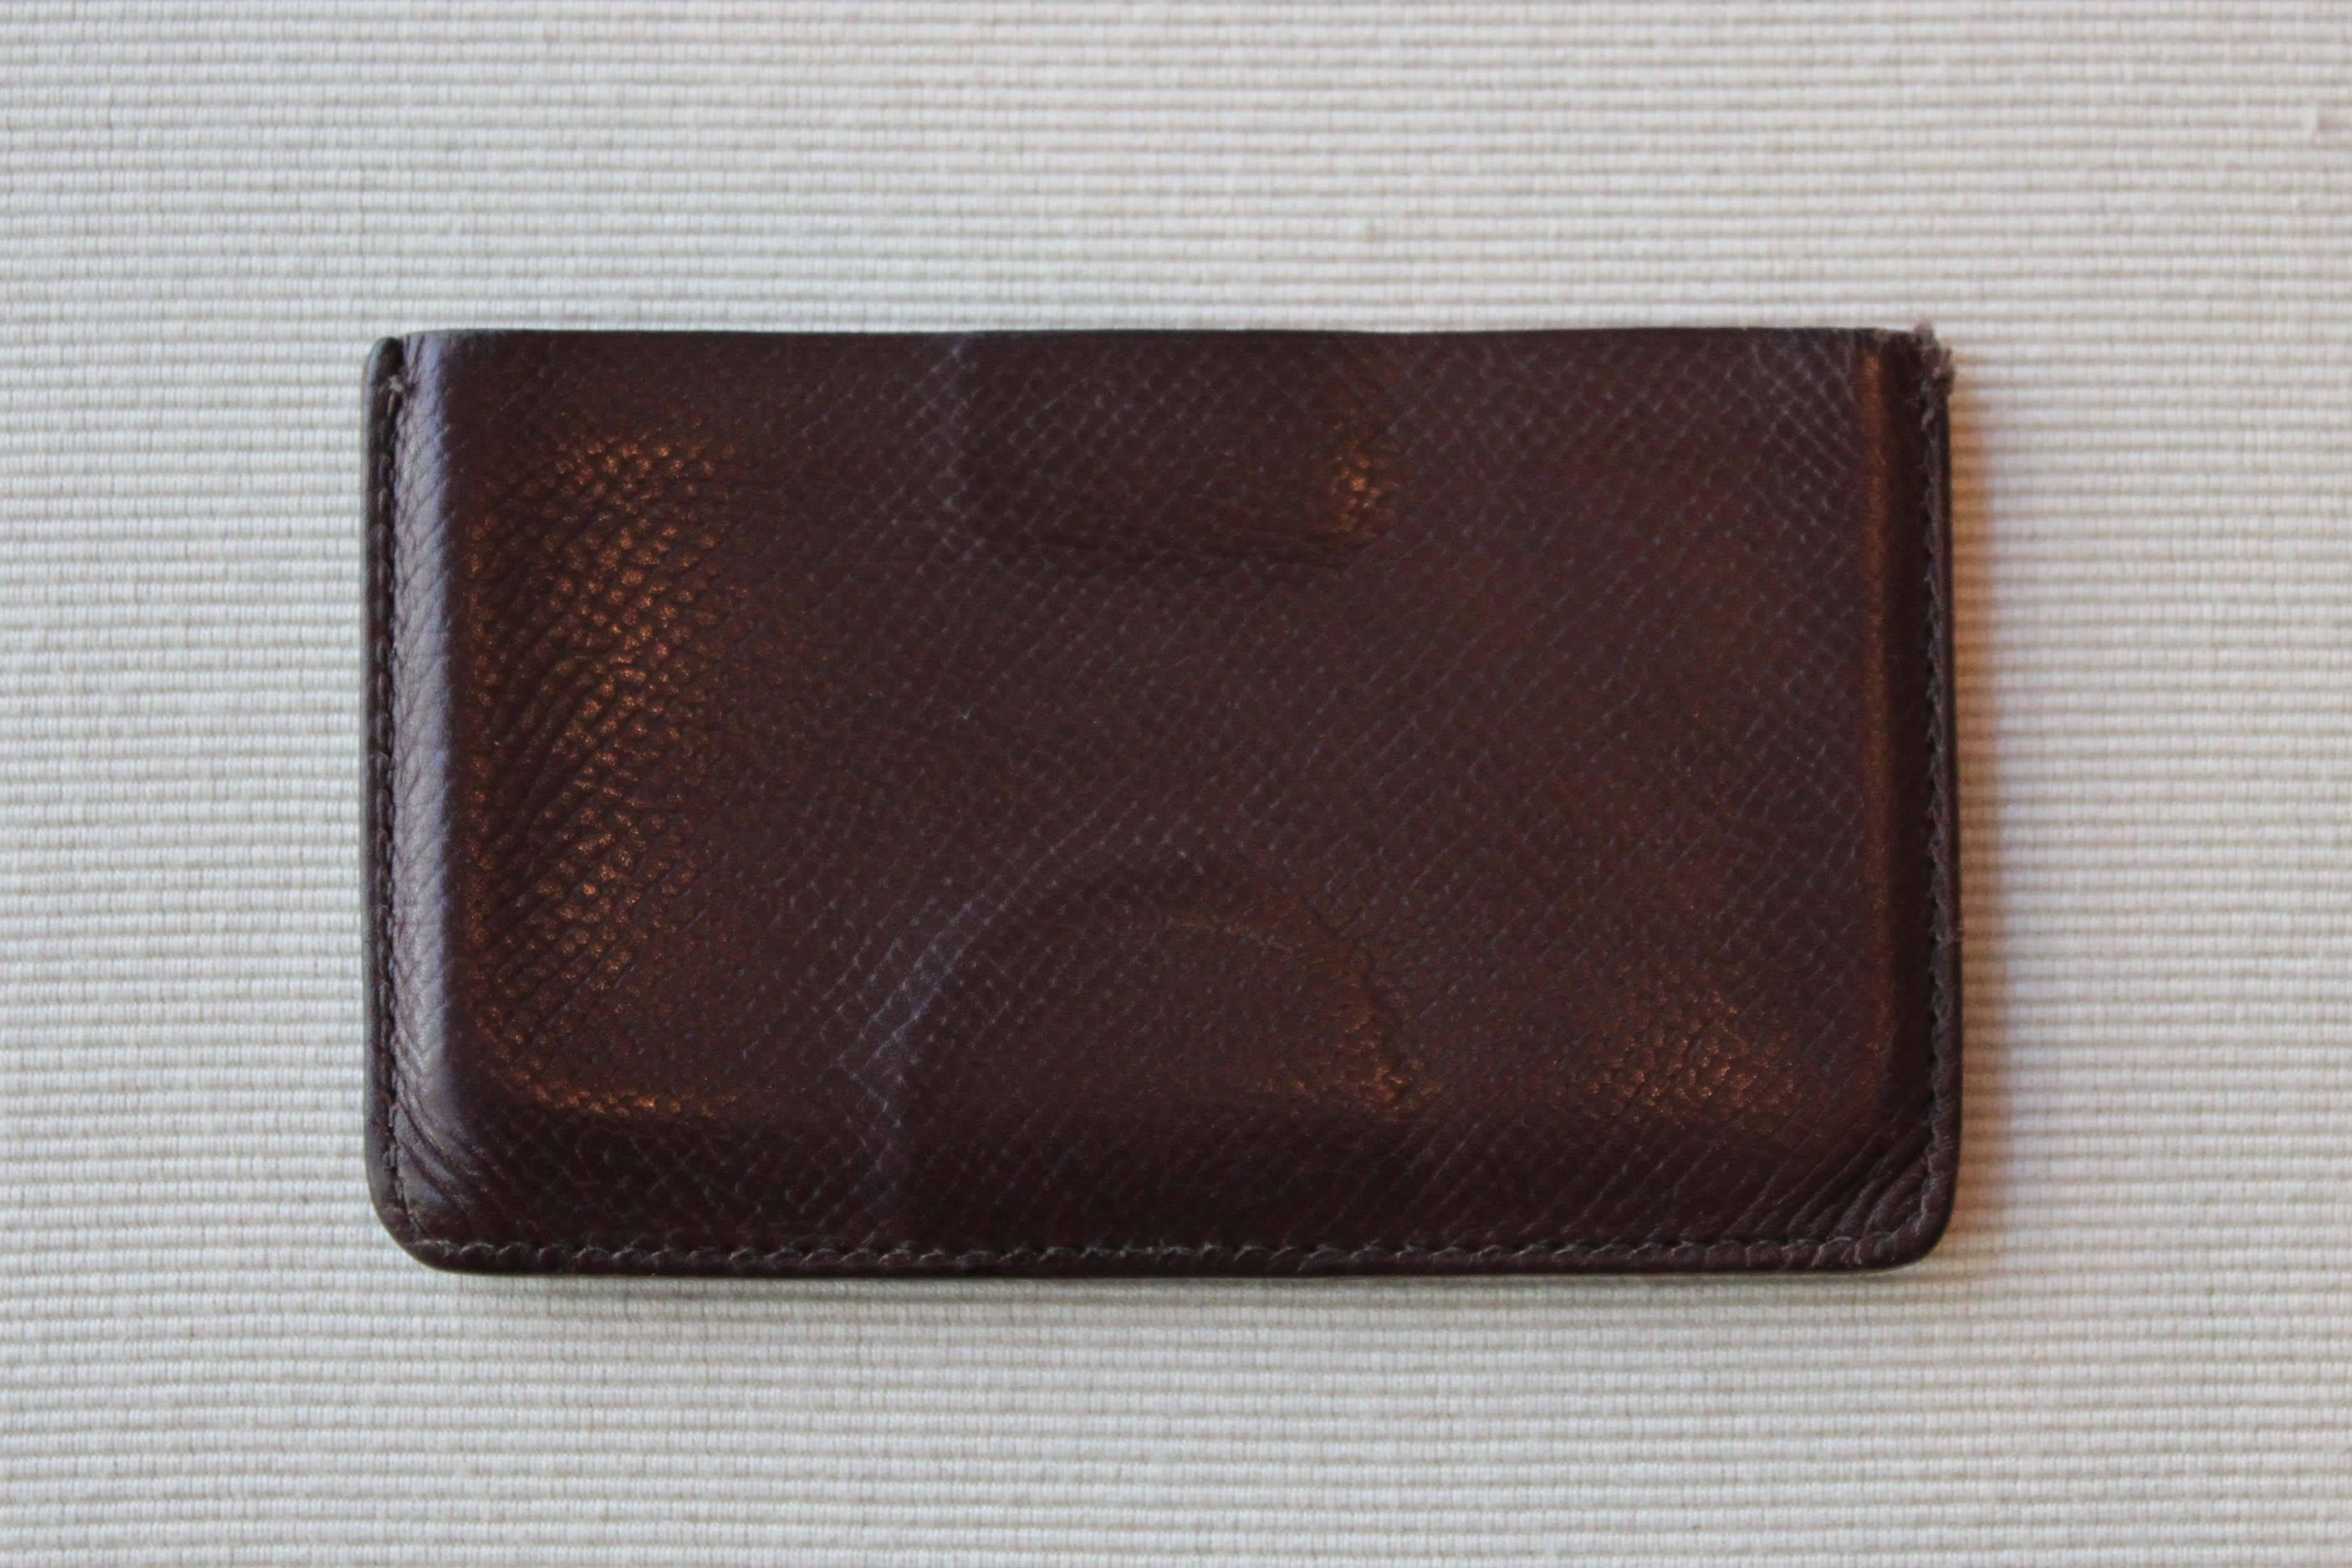 Vintage Hermès leather card case in brown Epsom calfskin. Good overall condition consistent with regular use. Does not include packaging.